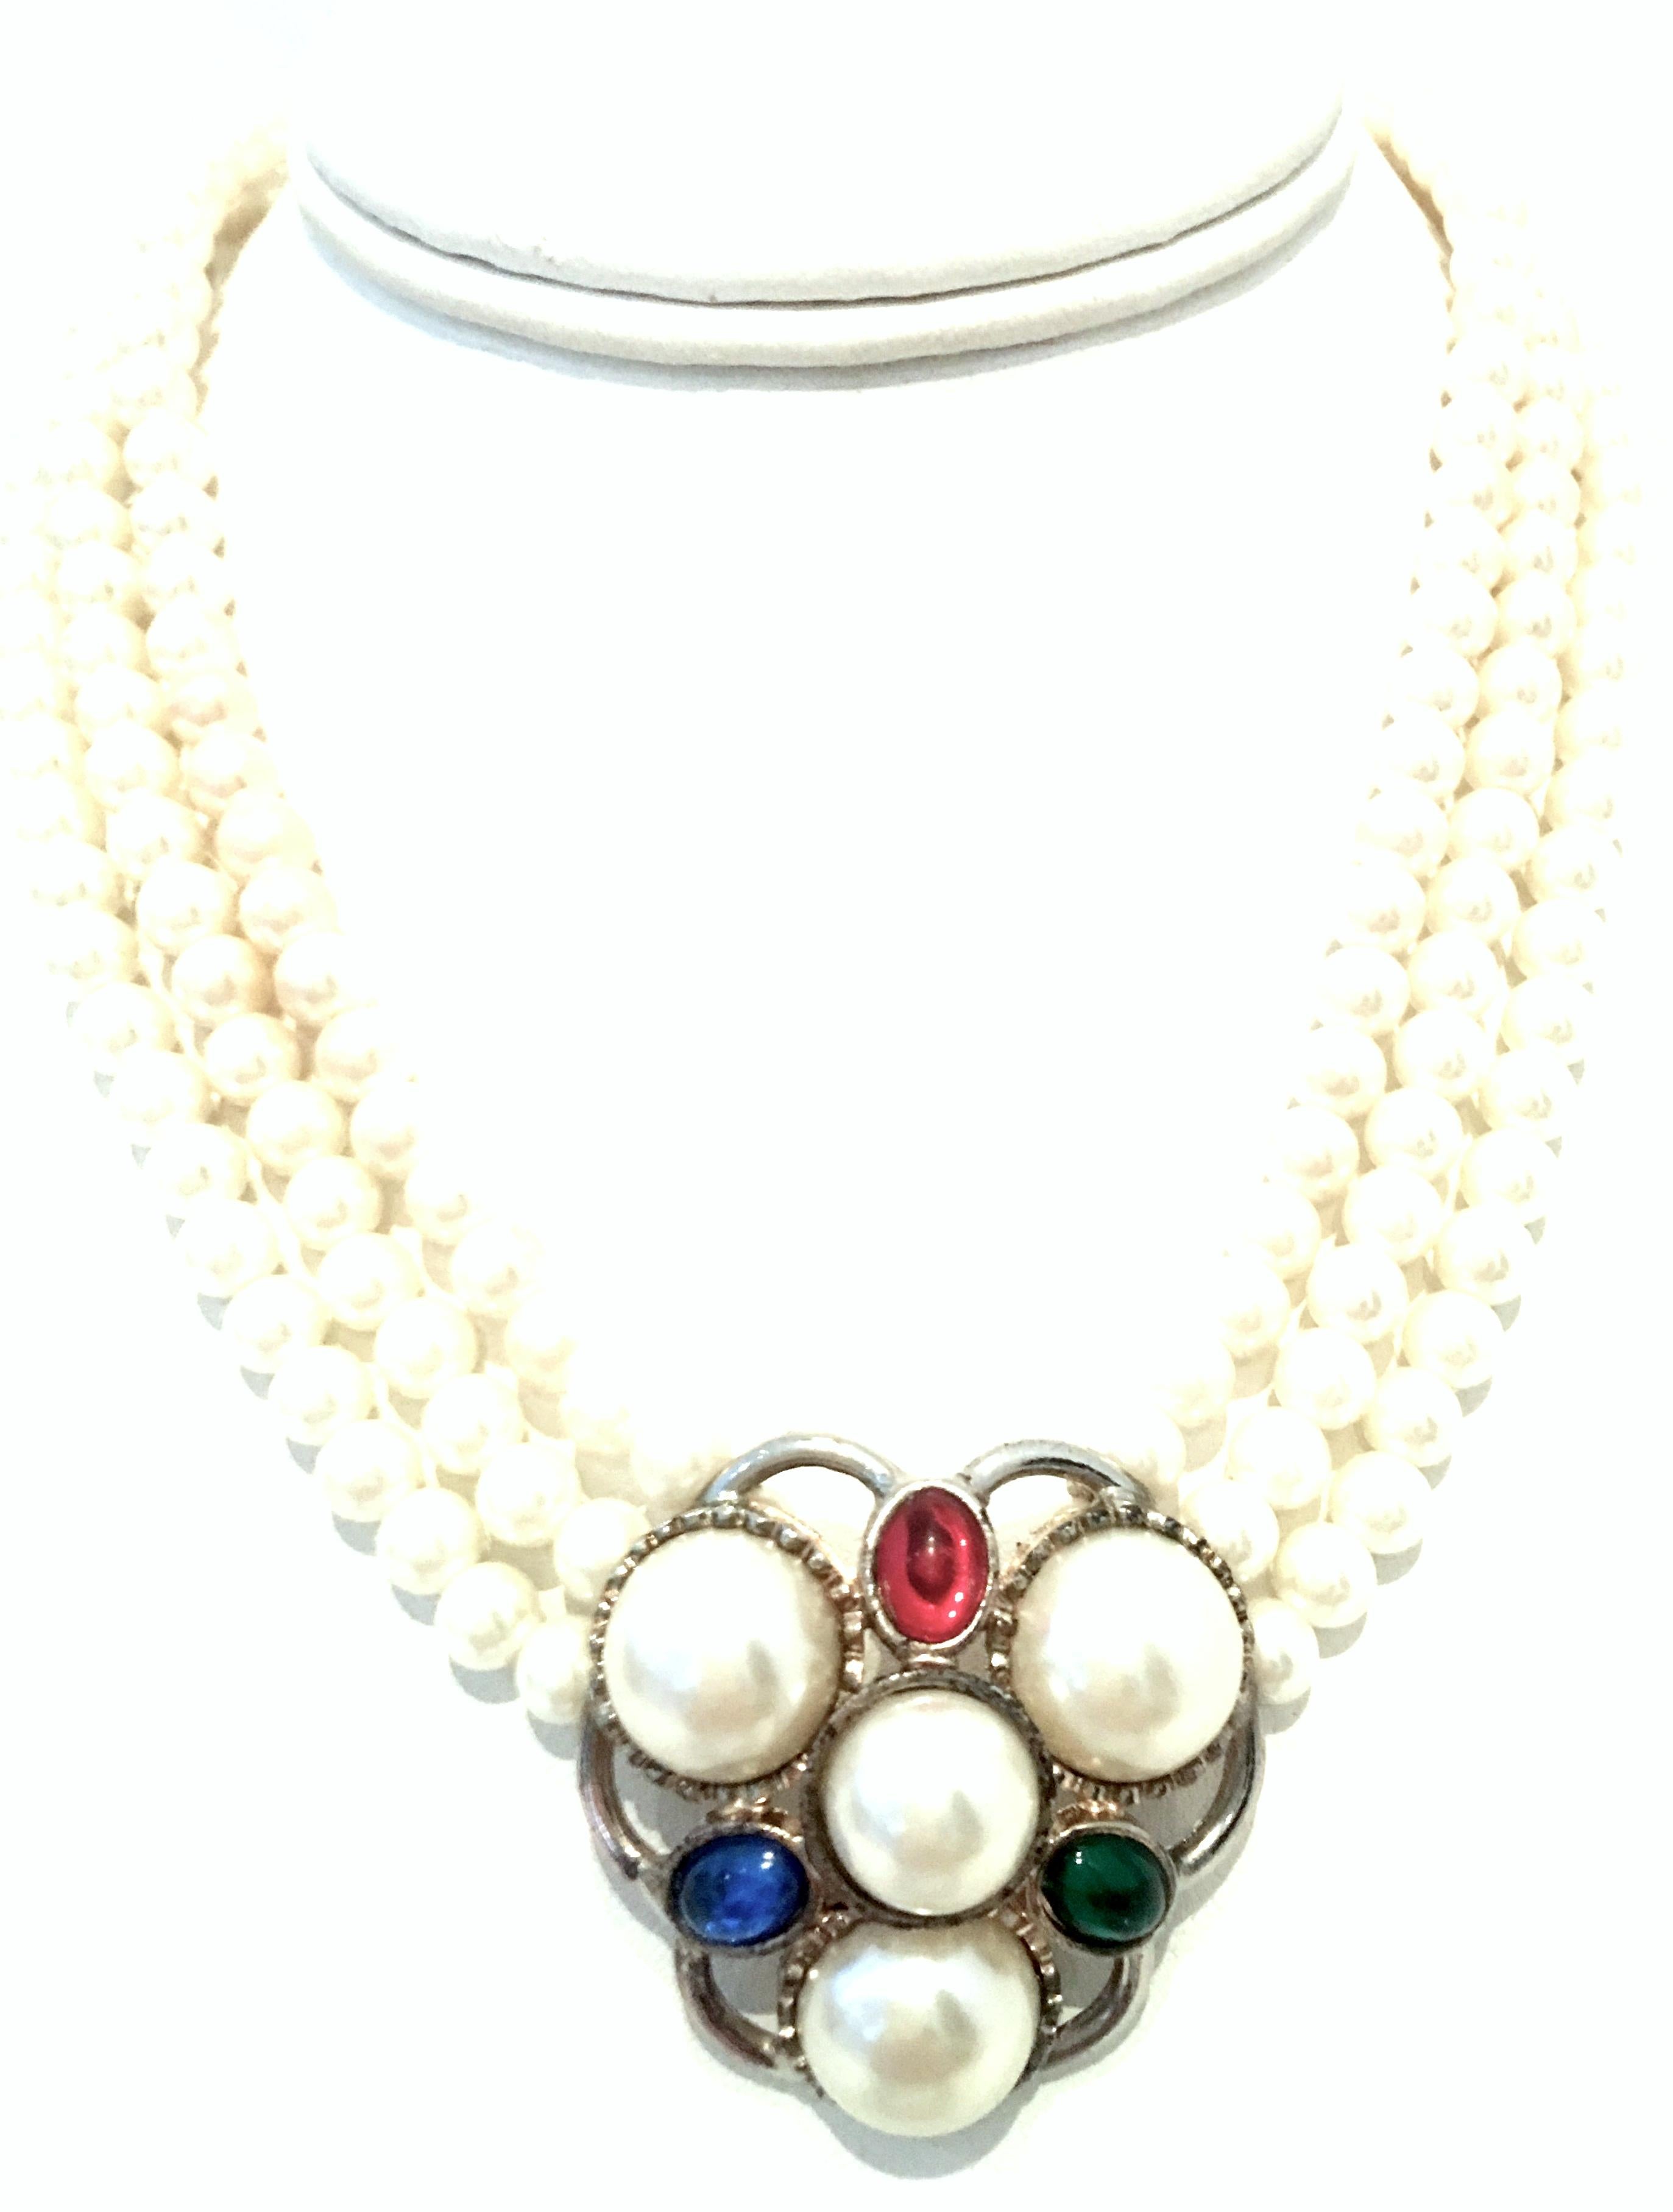 Mid-20th Century Triple Strand Faux Pearl & Austrian Crystal Choker Style Necklace. This finely crafted piece features, three strands of white faux pearl beads each measuring approximately, .25